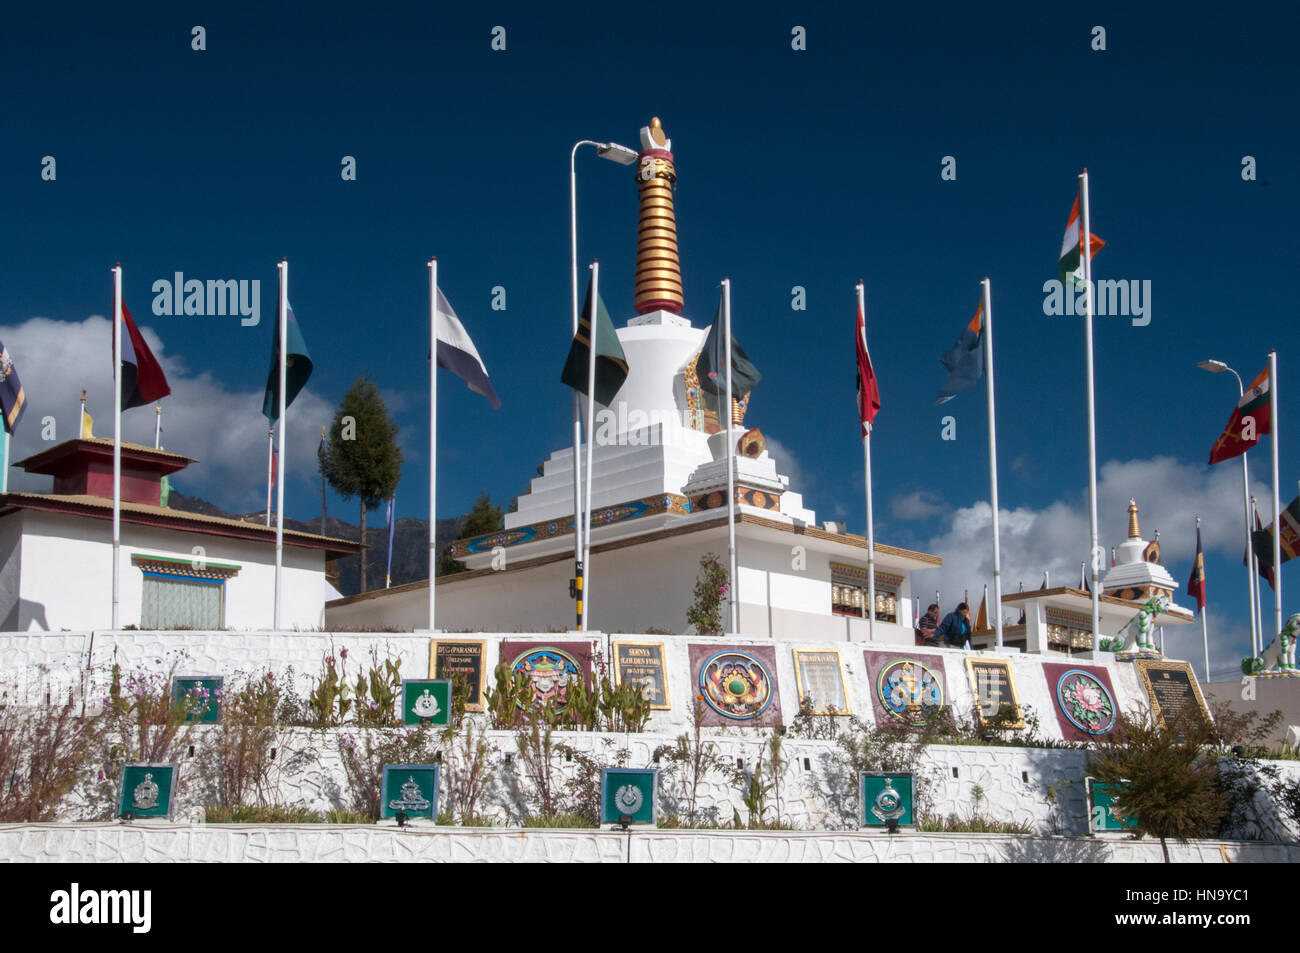 War memorial in the form of a Buddhist stupa at Tawang, NE India, honouring Indian troops who fell in the 1962 border conflict with China Stock Photo